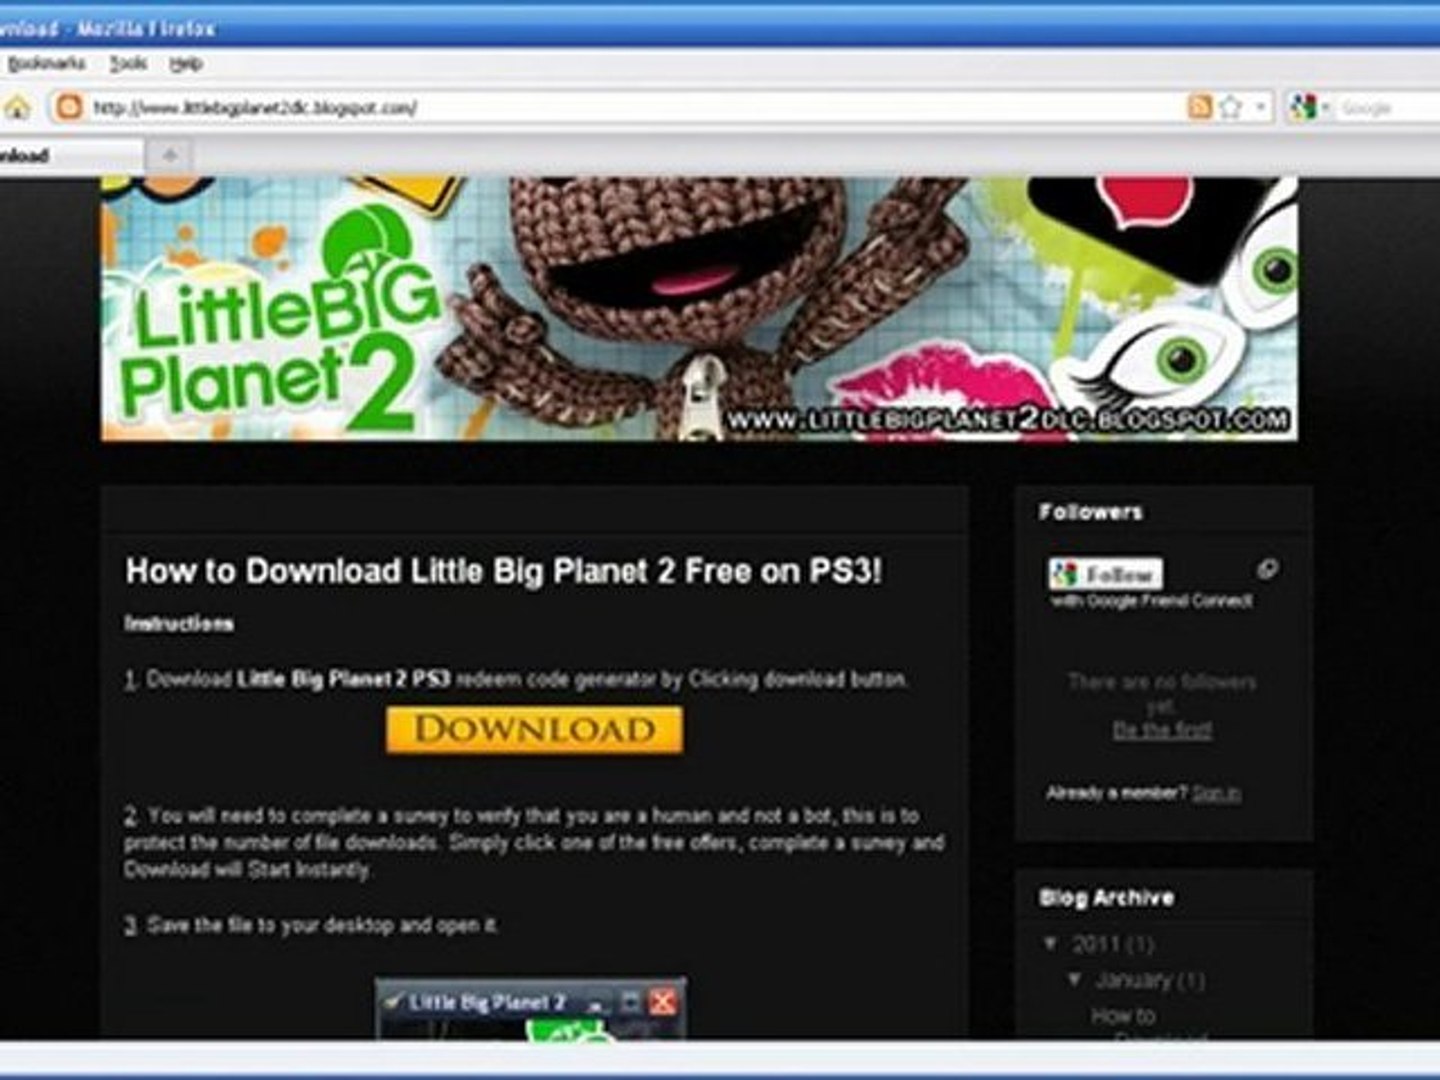 How to Get Little Big Planet 2 Code Generator - PS3 - video Dailymotion